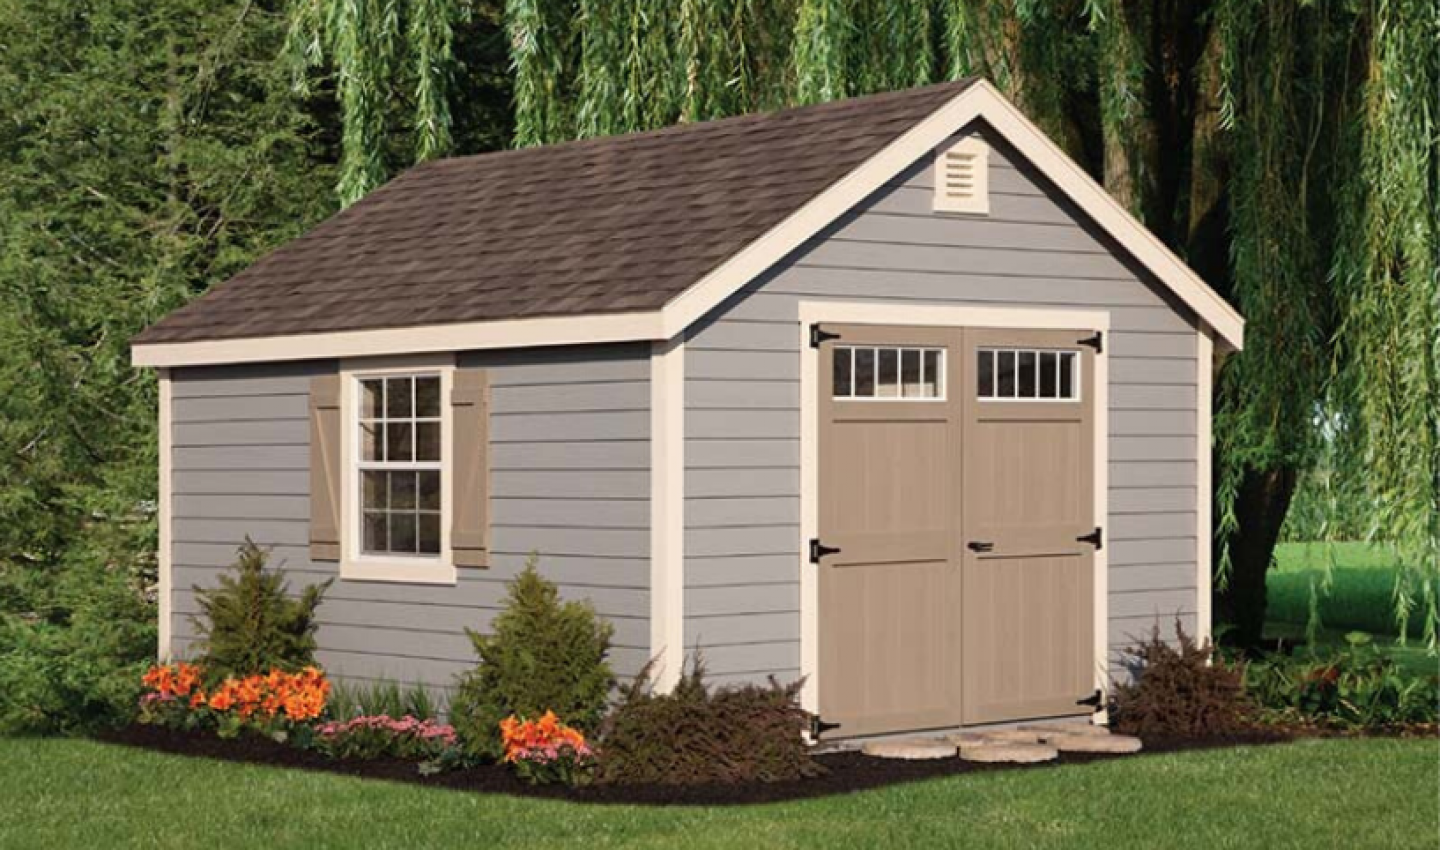 Shed Color Ideas that You’ll Love